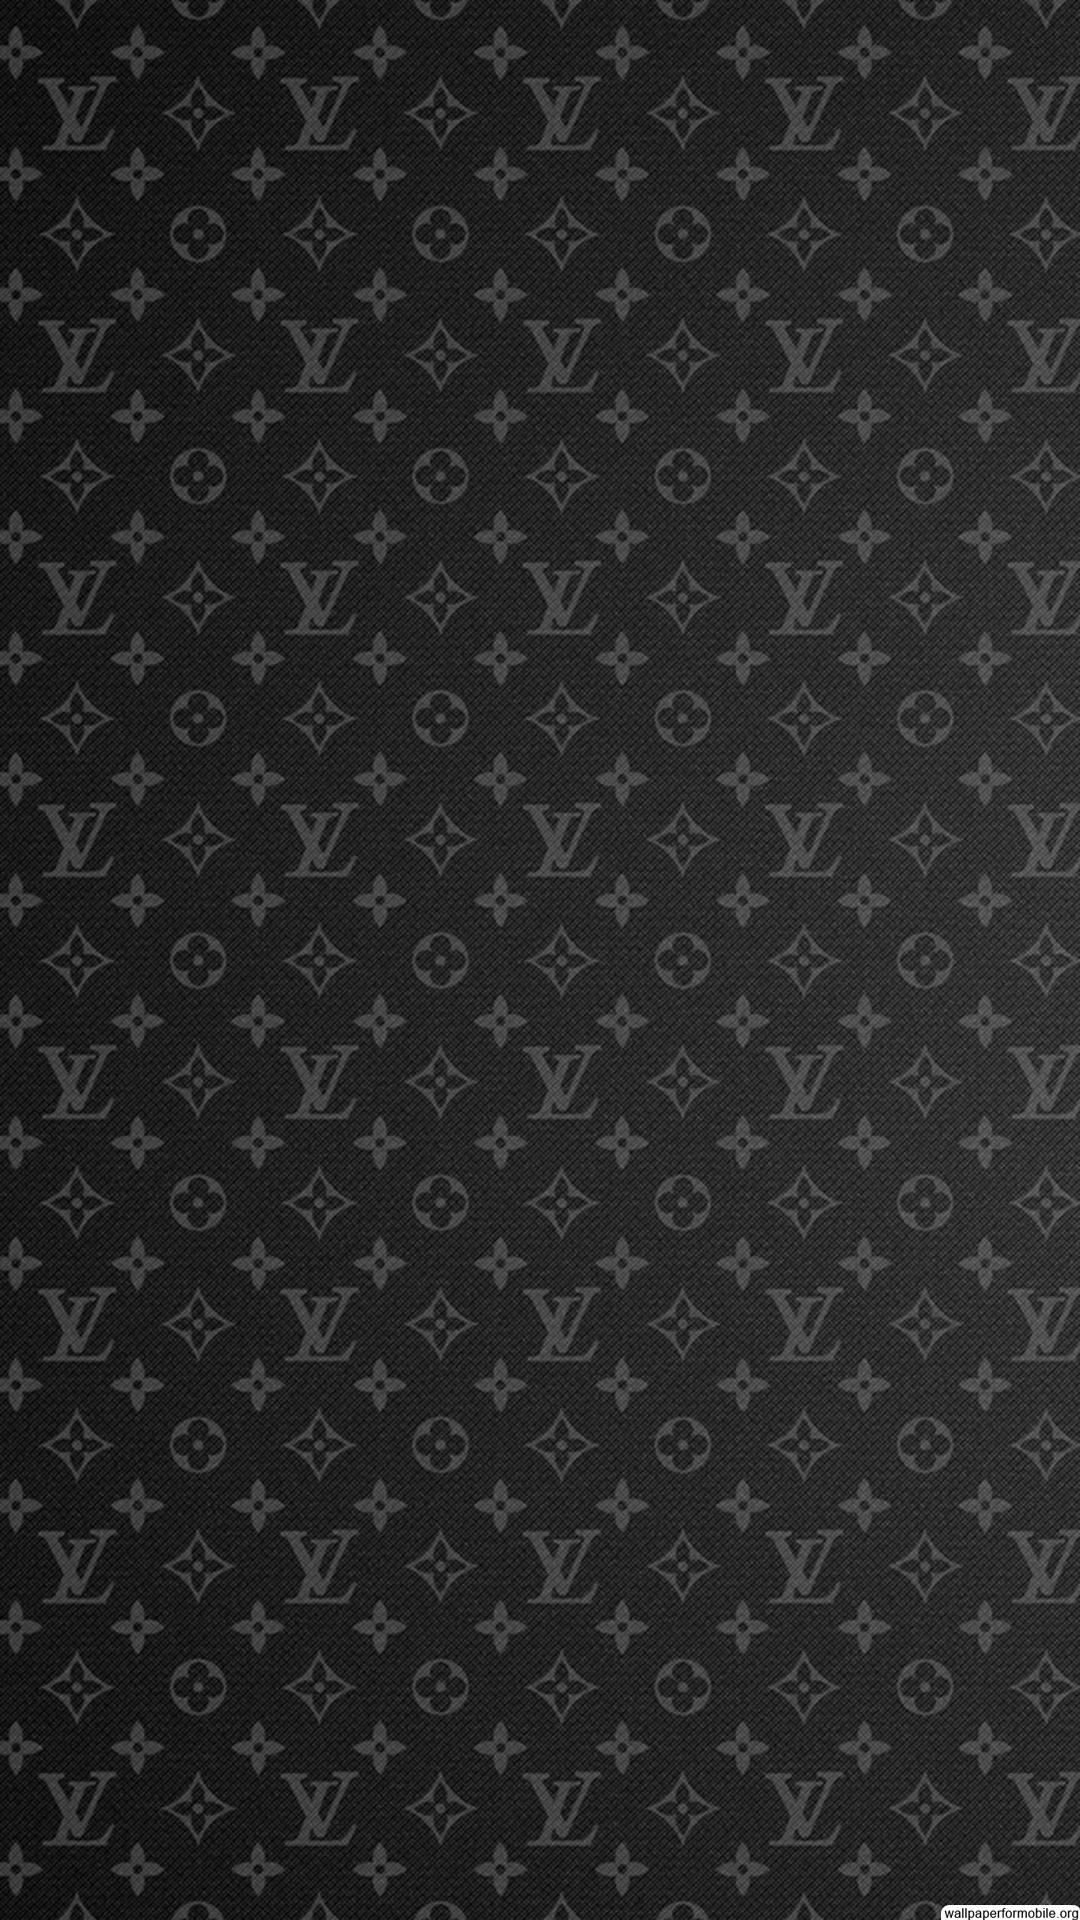 Download LUXURY IN BLUE – Louis Vuitton Blue Collection Wallpaper